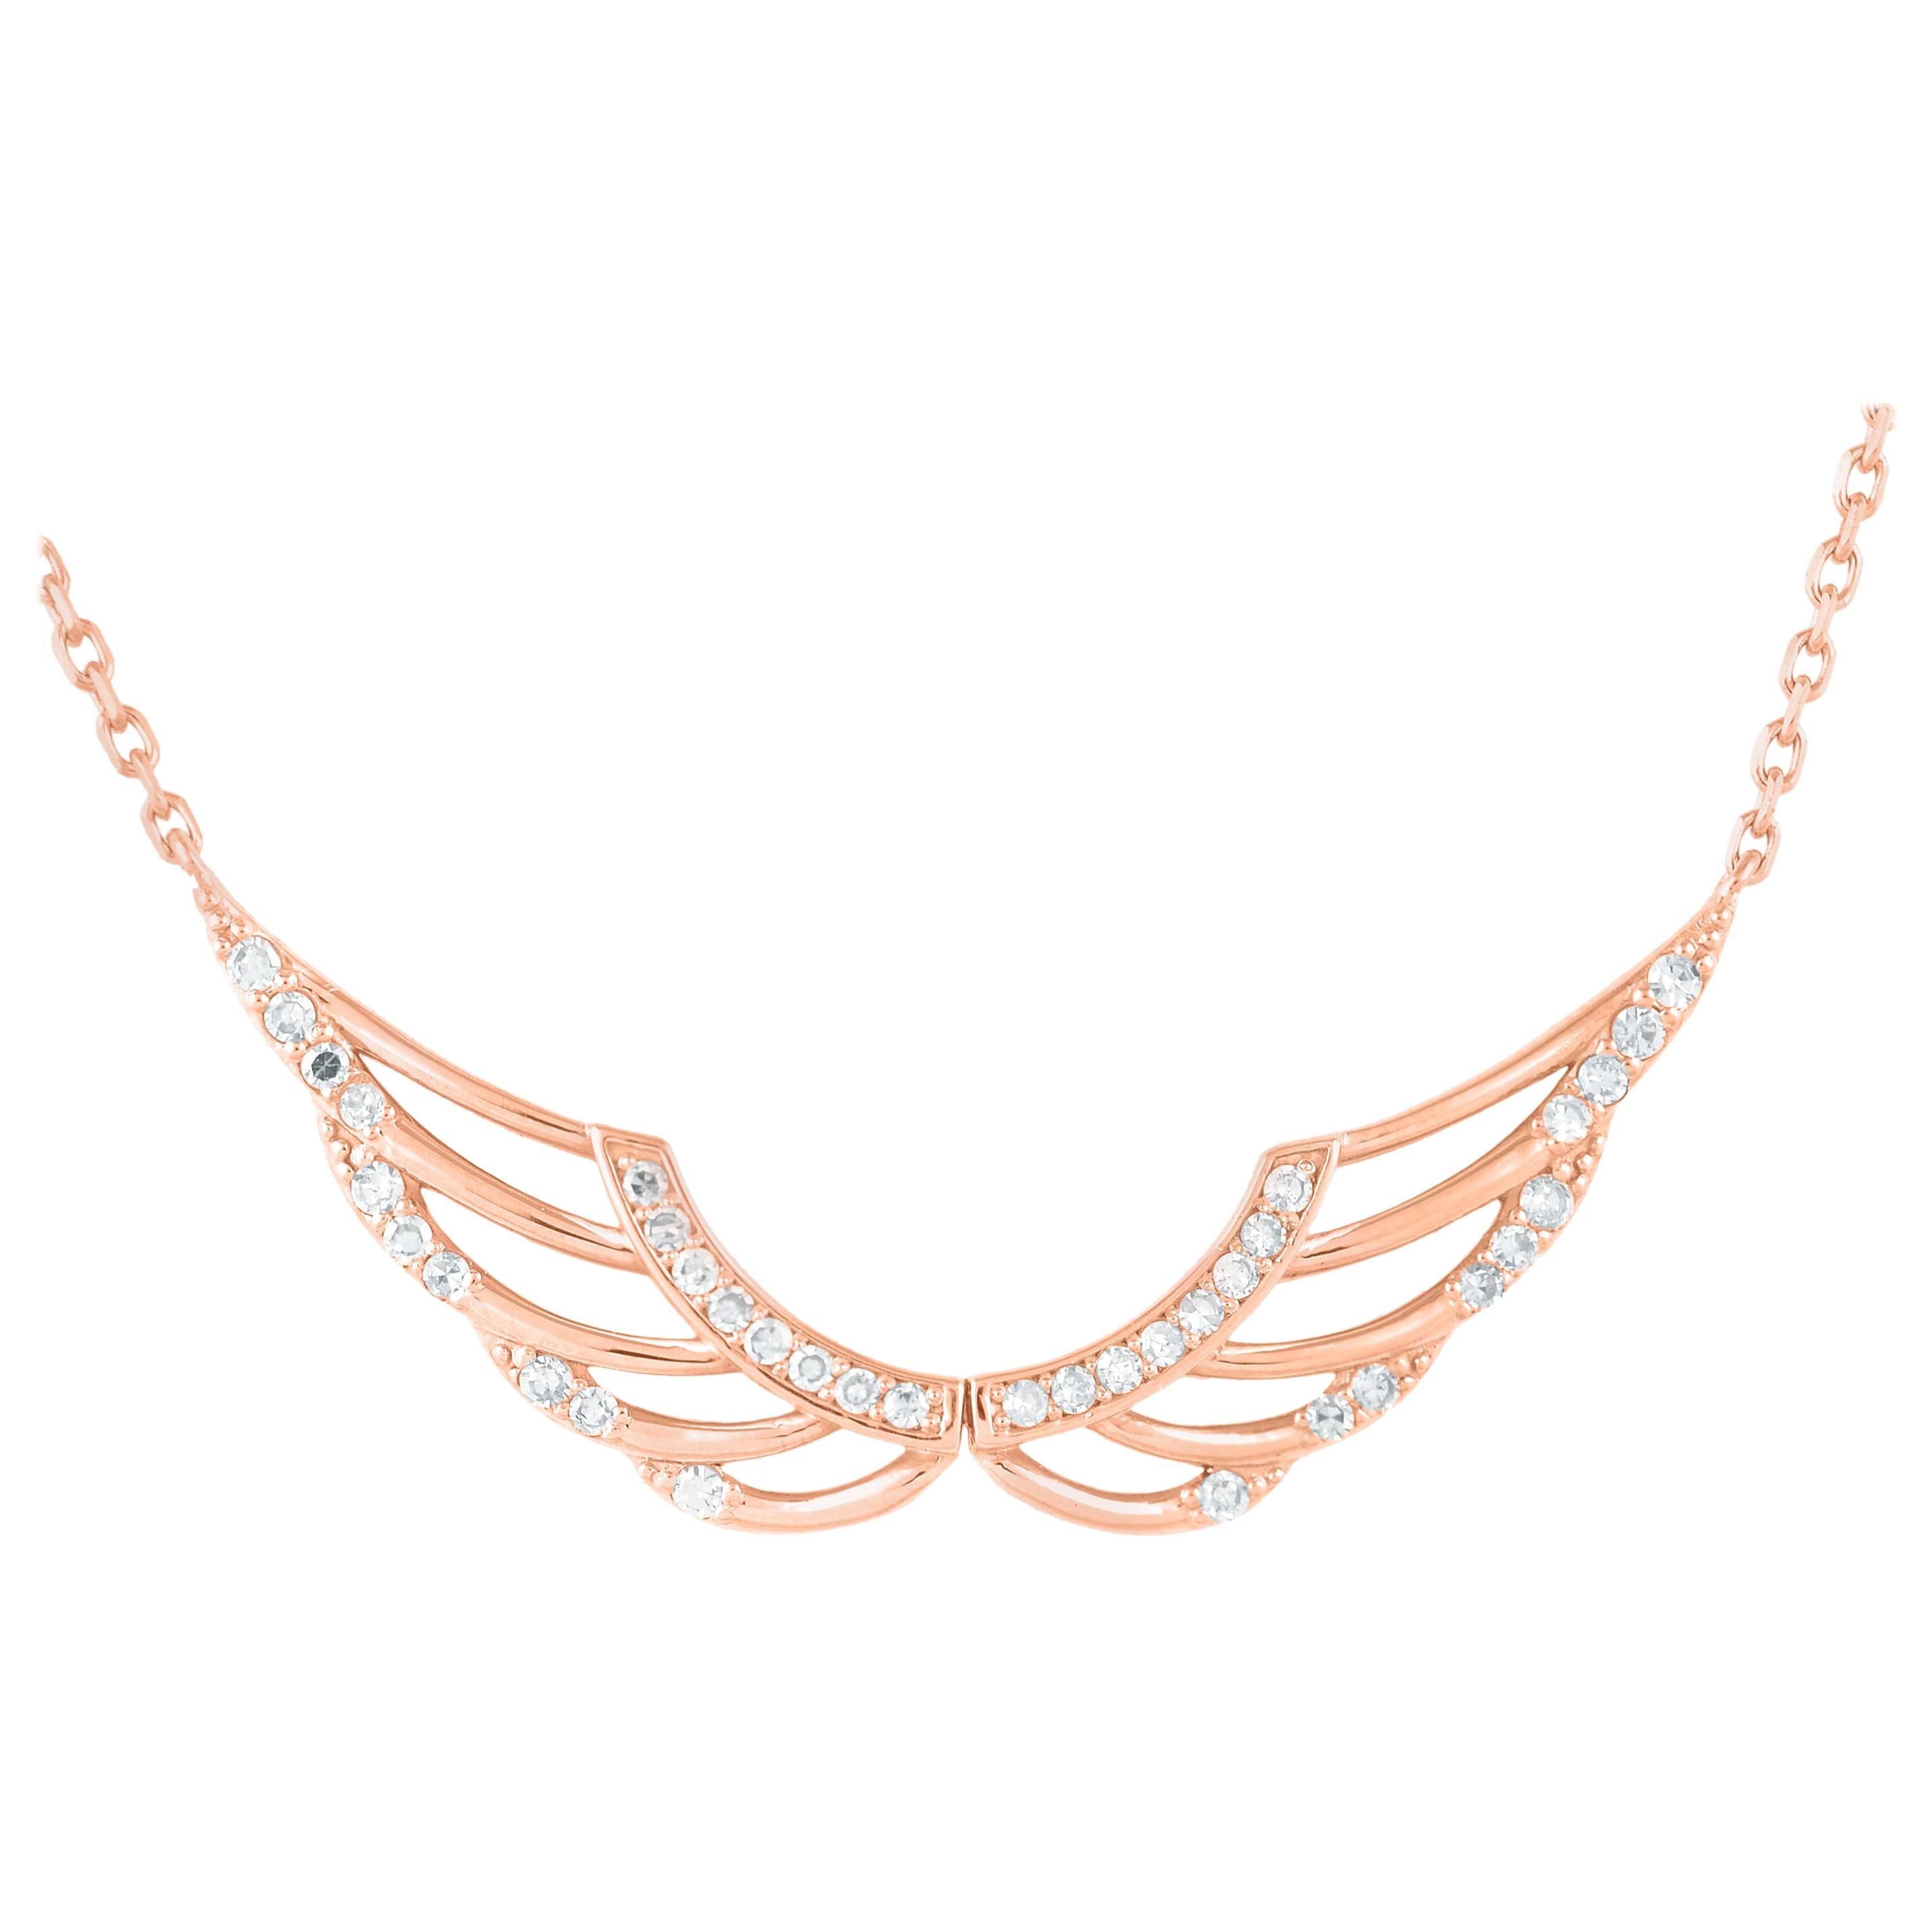 TJD 0.25 Carat Round Diamond 14Kt Rose Gold Angel Wings Fashion Necklace Pendant